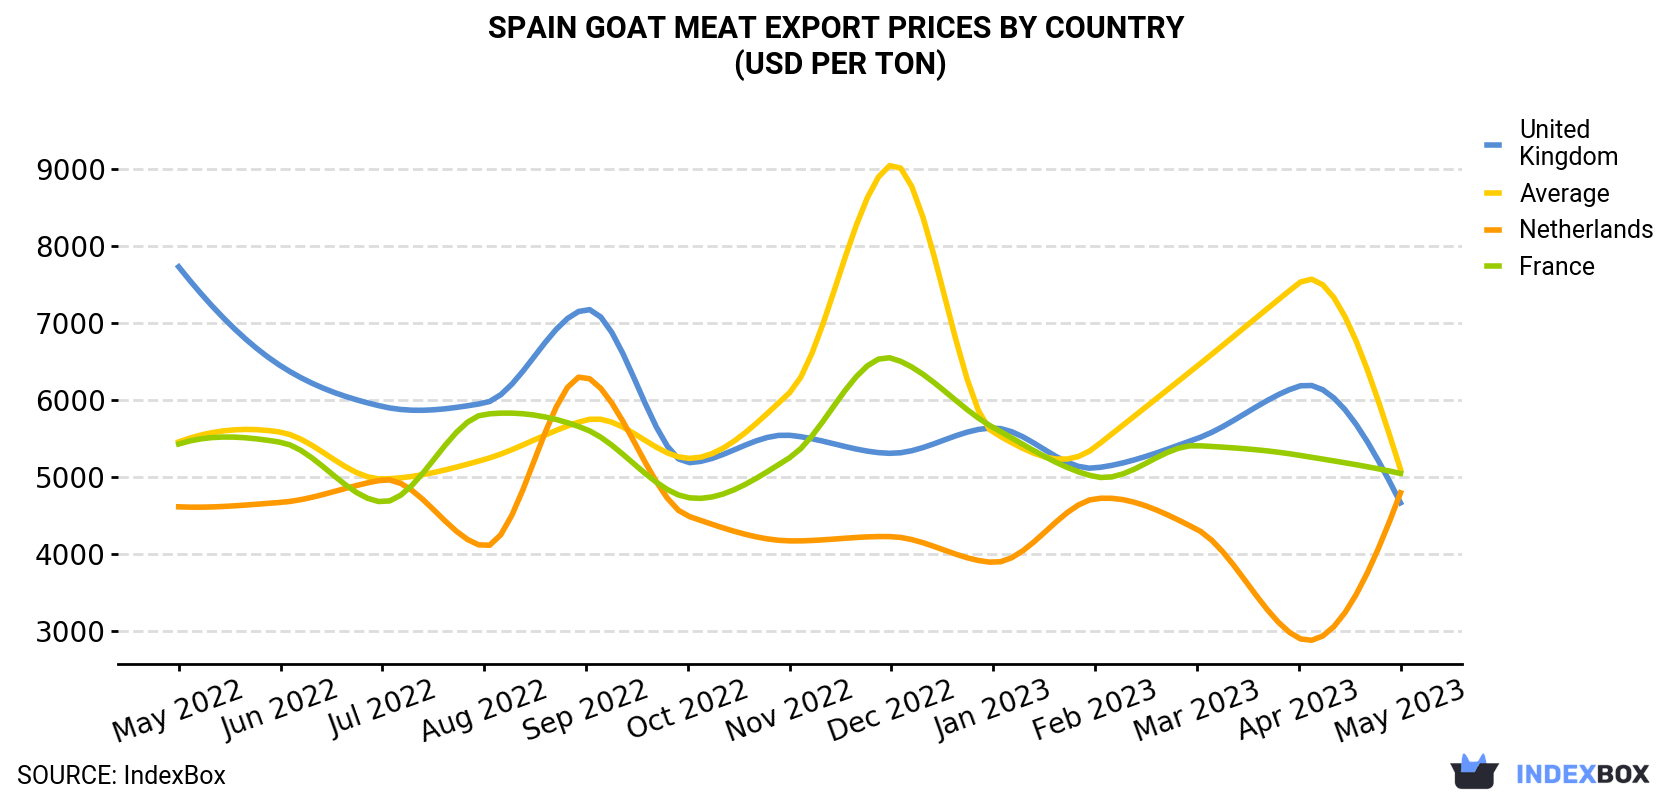 Spain Goat Meat Export Prices By Country (USD Per Ton)